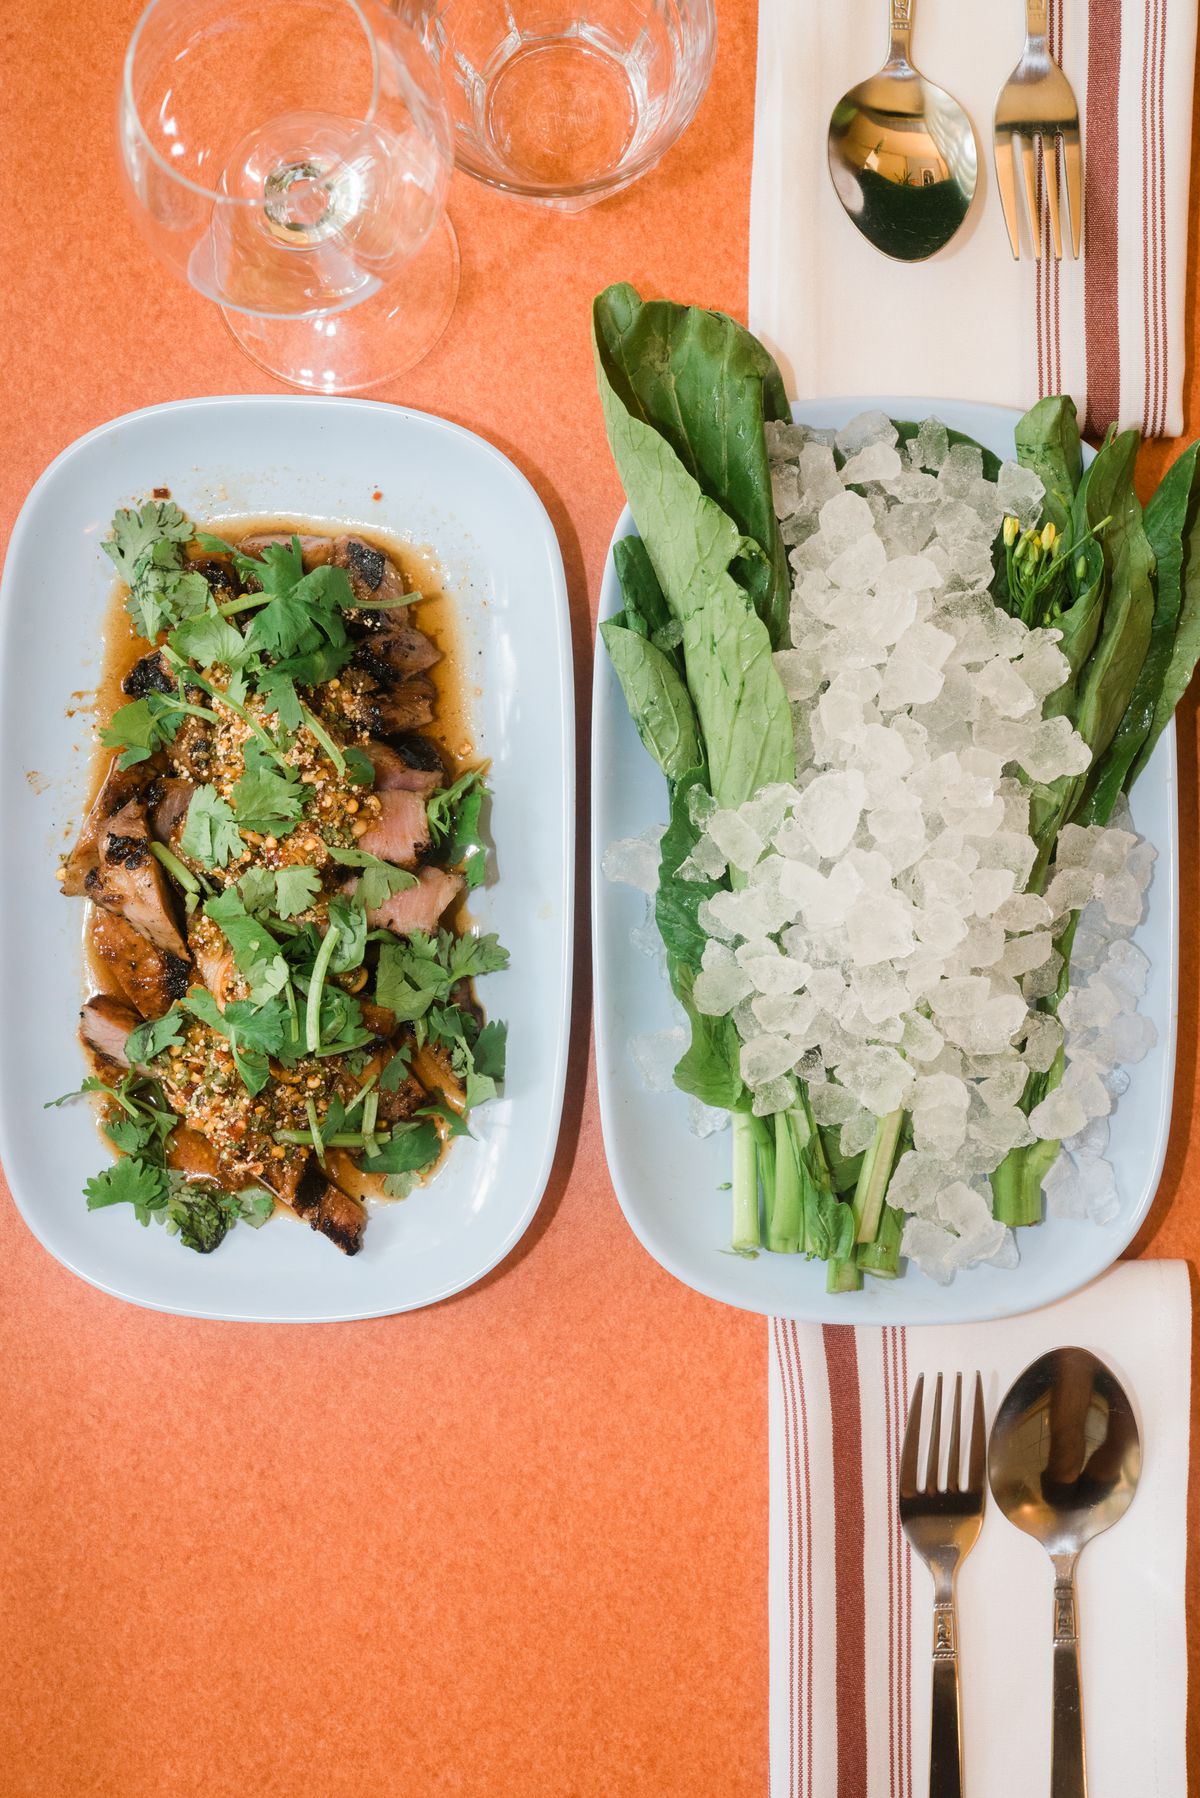 two dishes one with pork and herbs, the other with iced leafy greens on orange tabletop